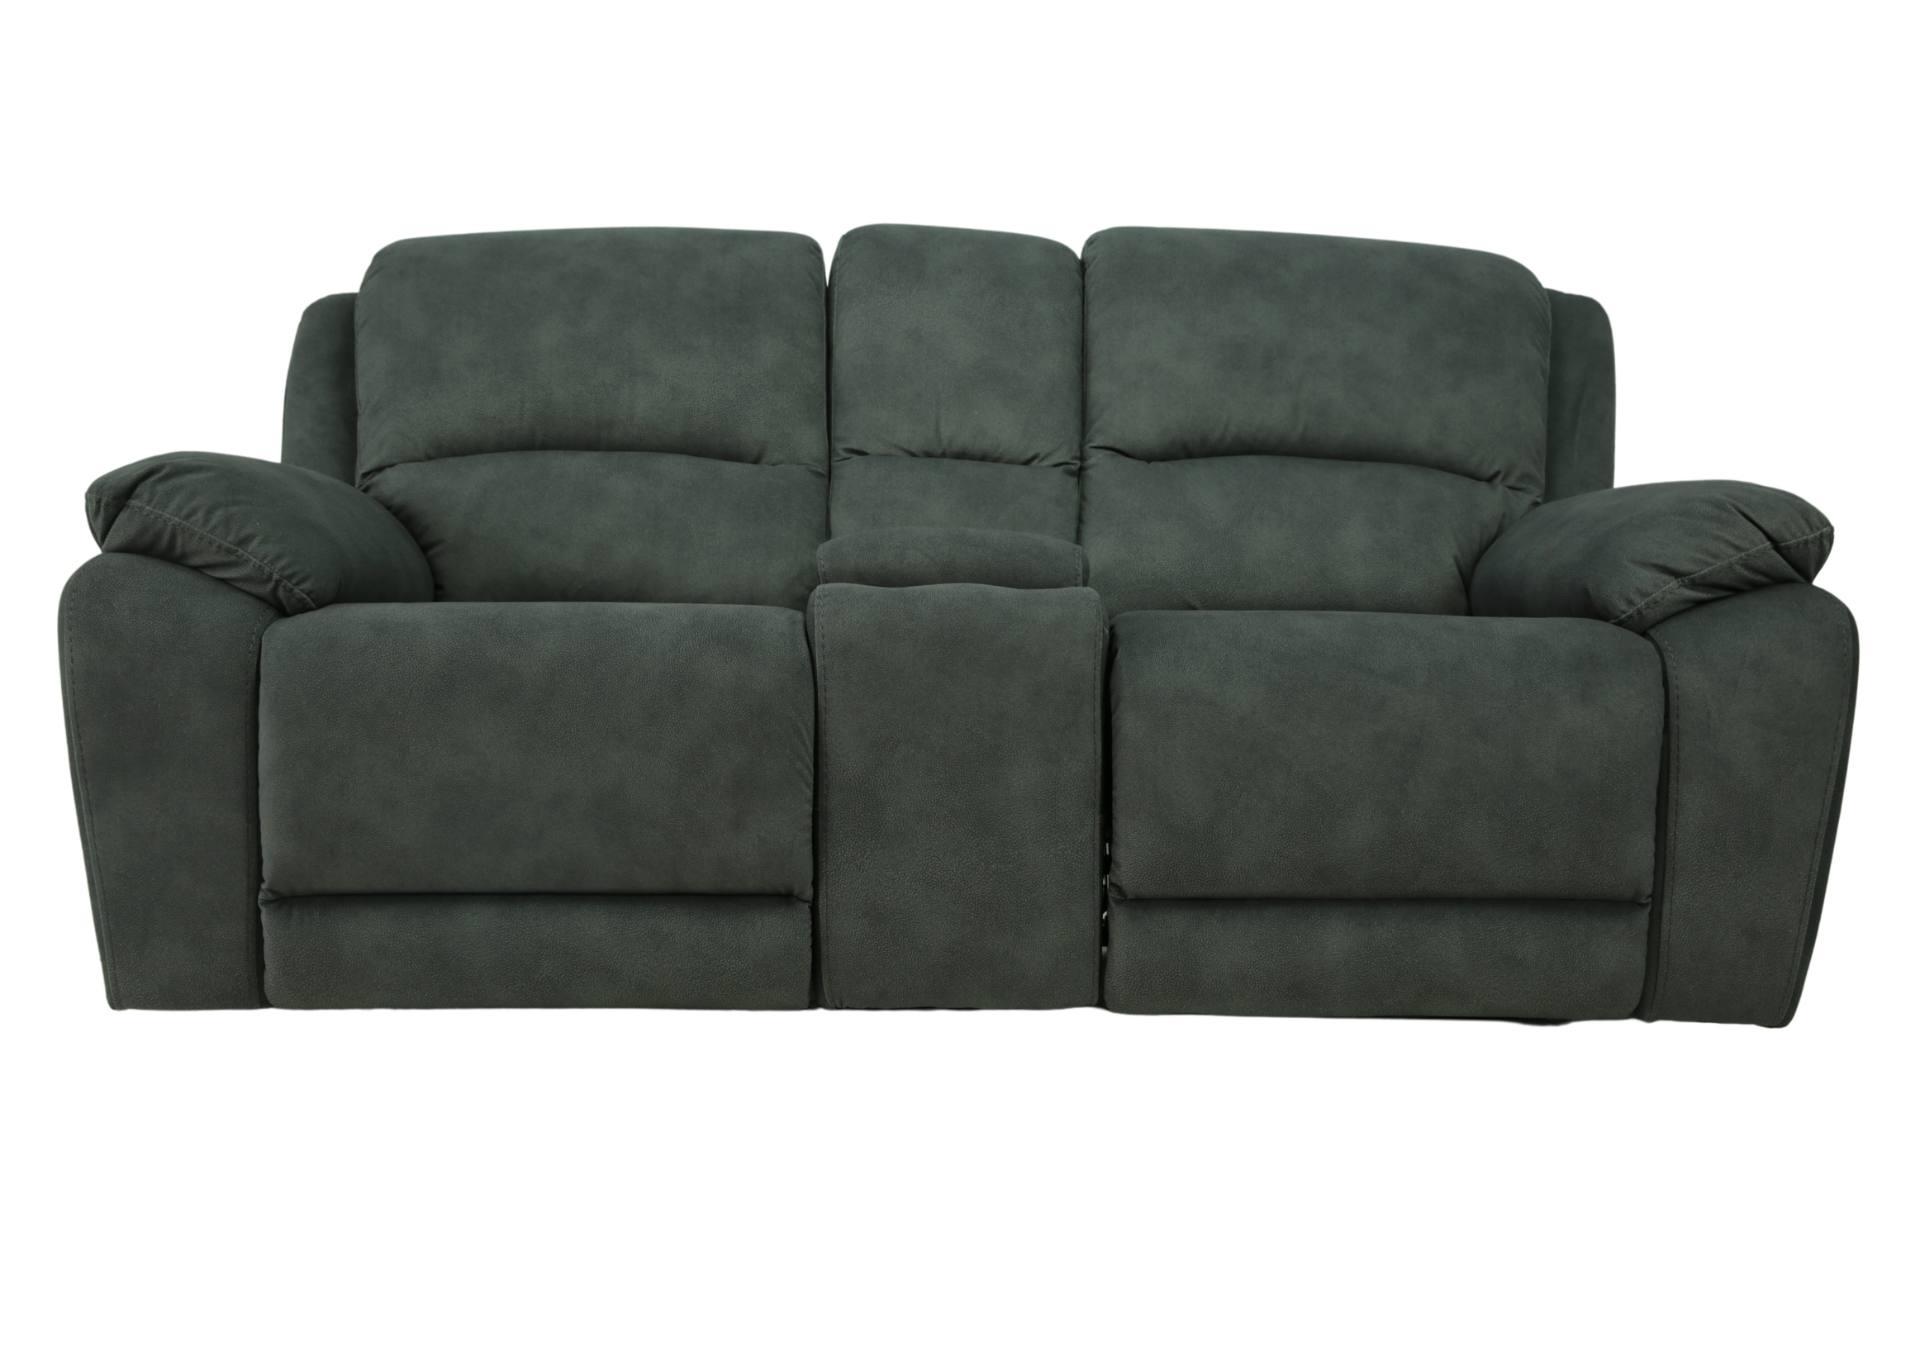 ASPEN STEEL 1P POWER LOVESEAT WITH CONSOLE,CHEERS